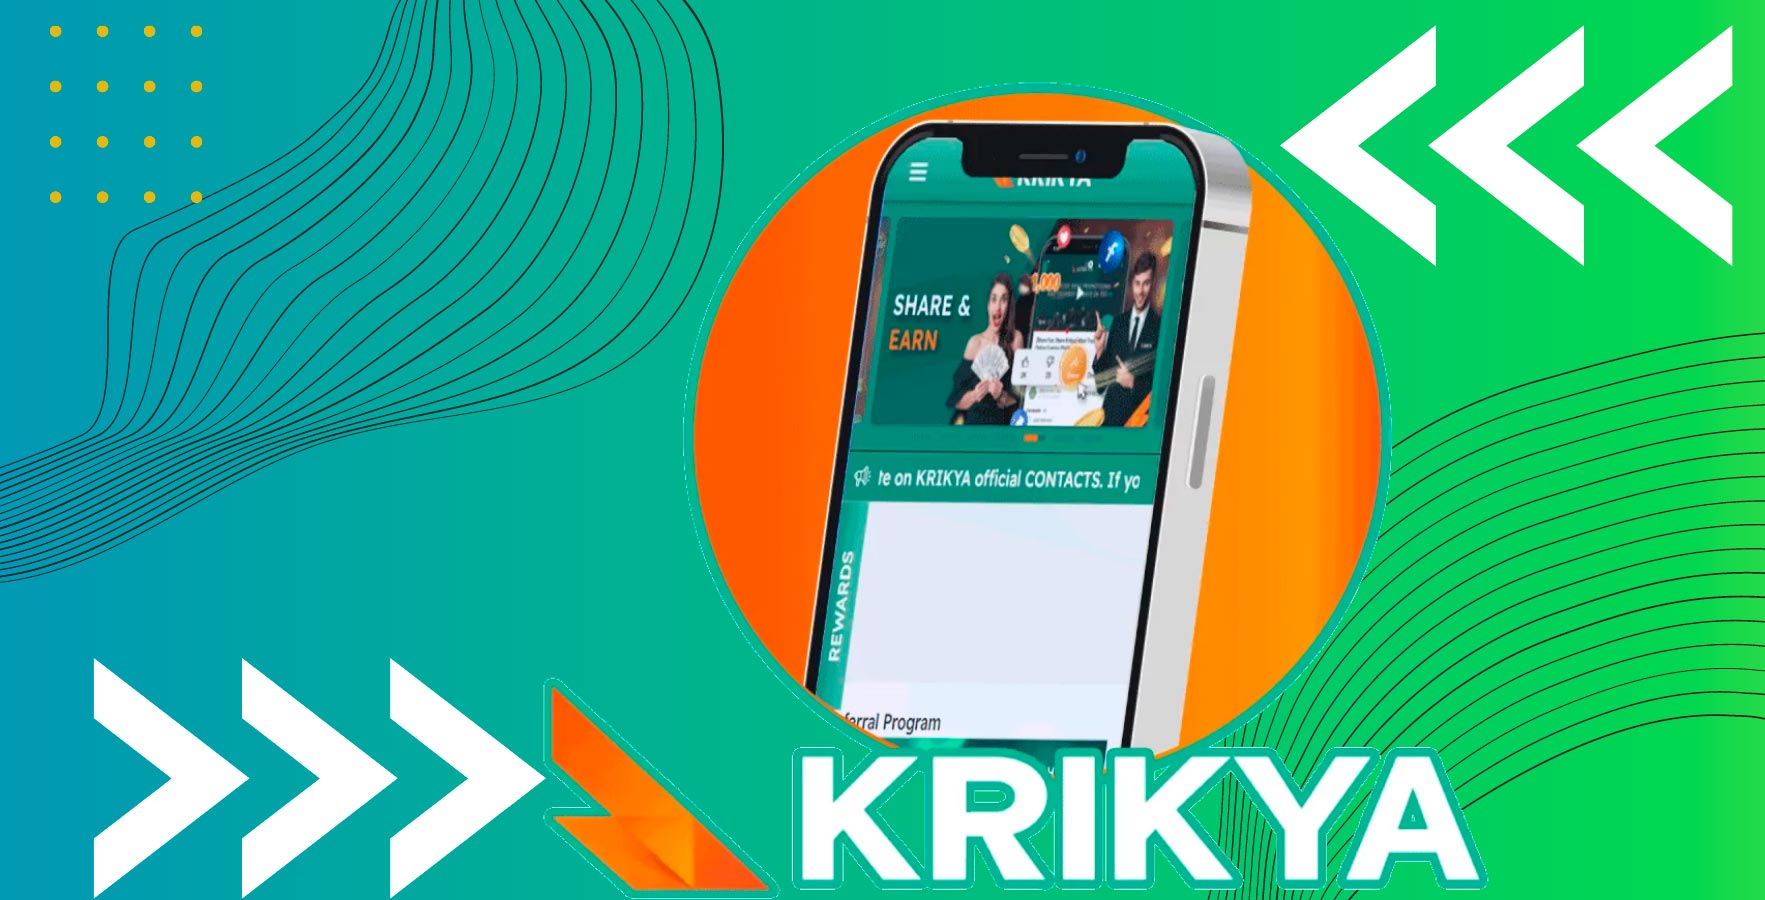 KRIKYA is one of the most popular gambling applications